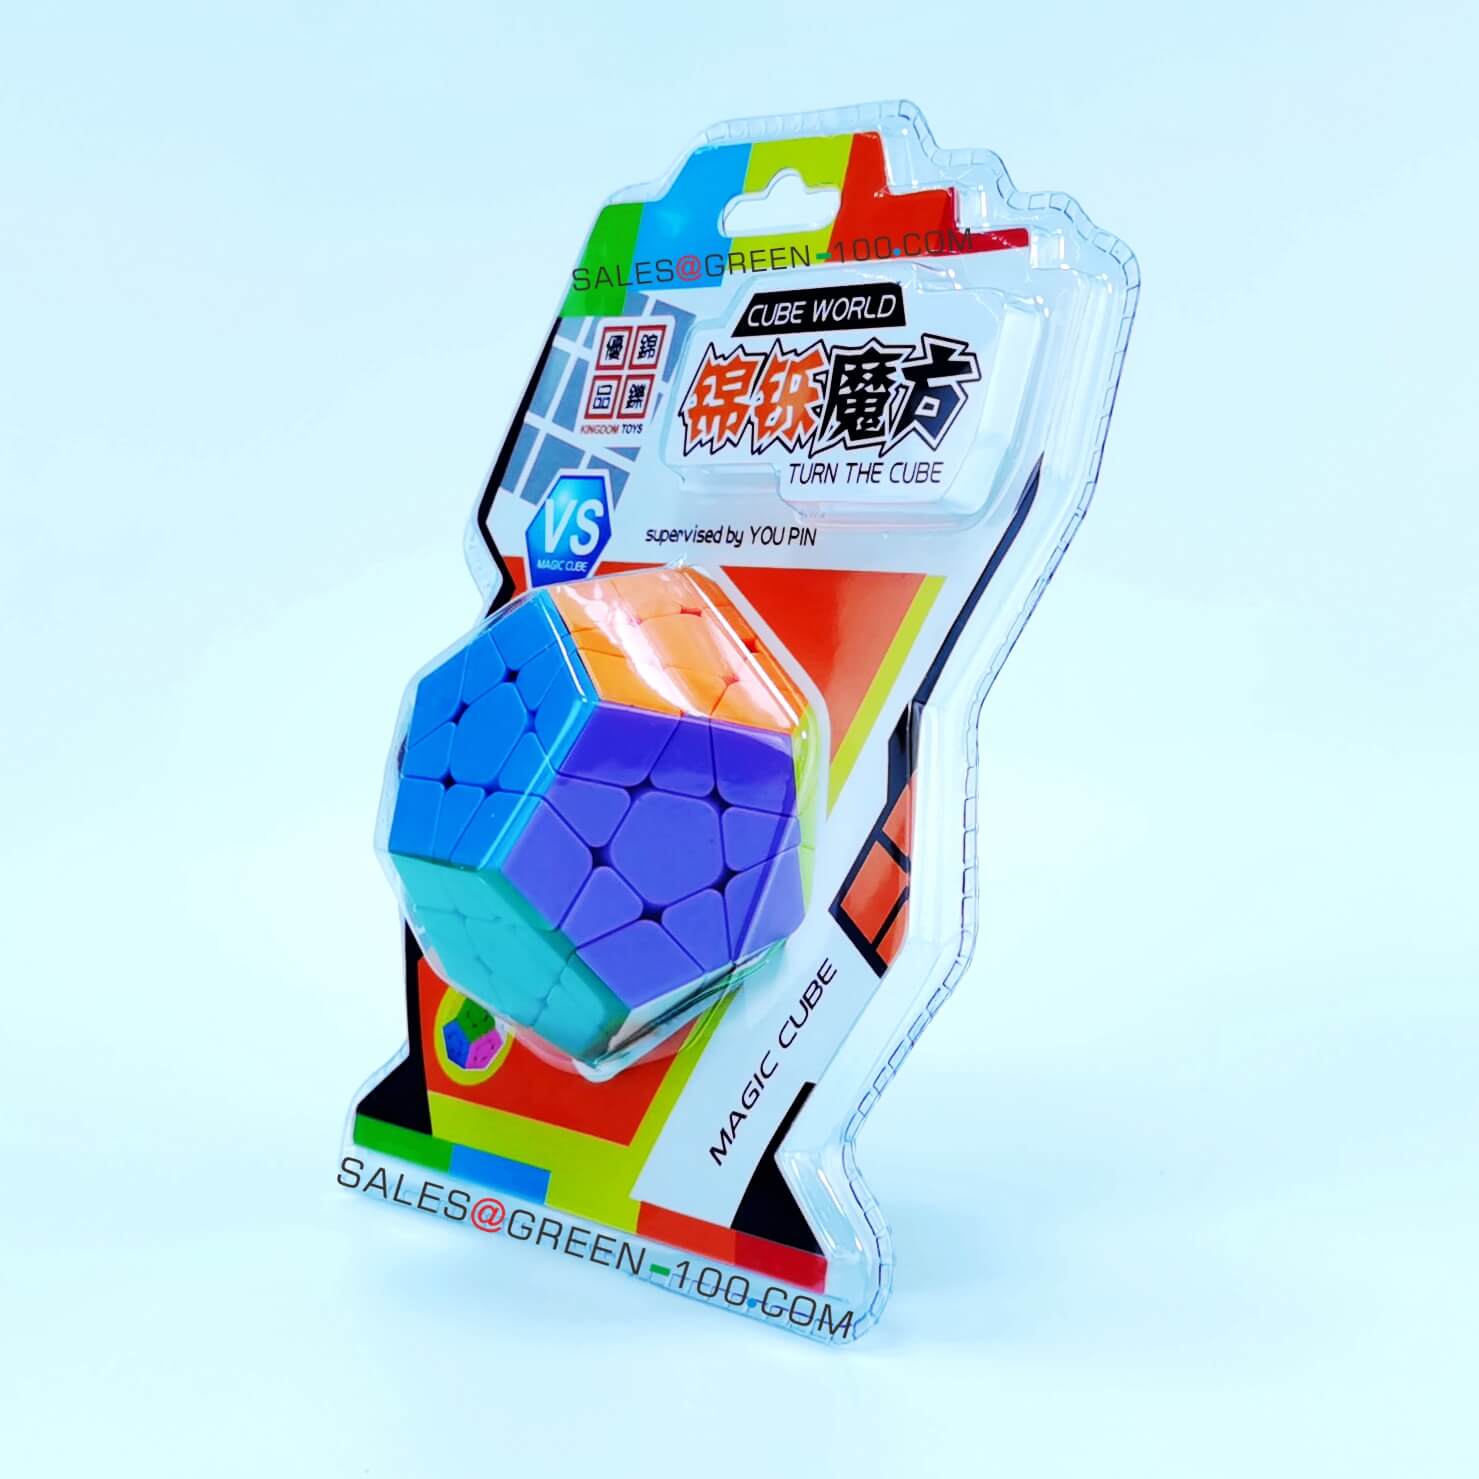 rubik's cube packaging manufacturers in china